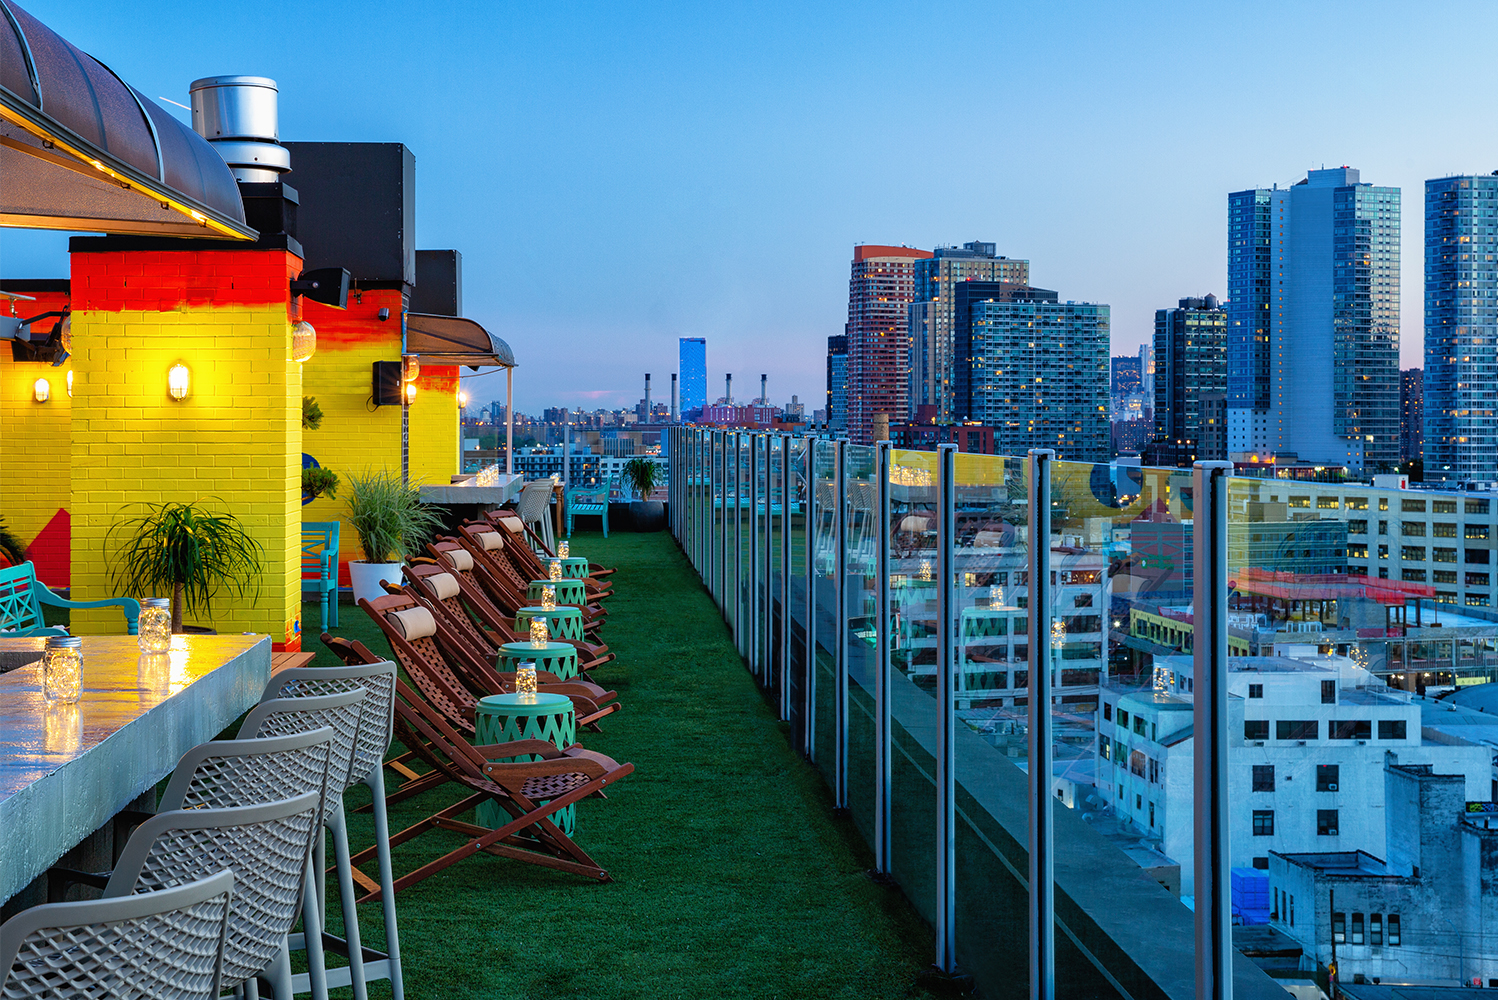 Savanna Rooftop opened as a new open-air rooftop lounge with views of the Manhattan skyline  